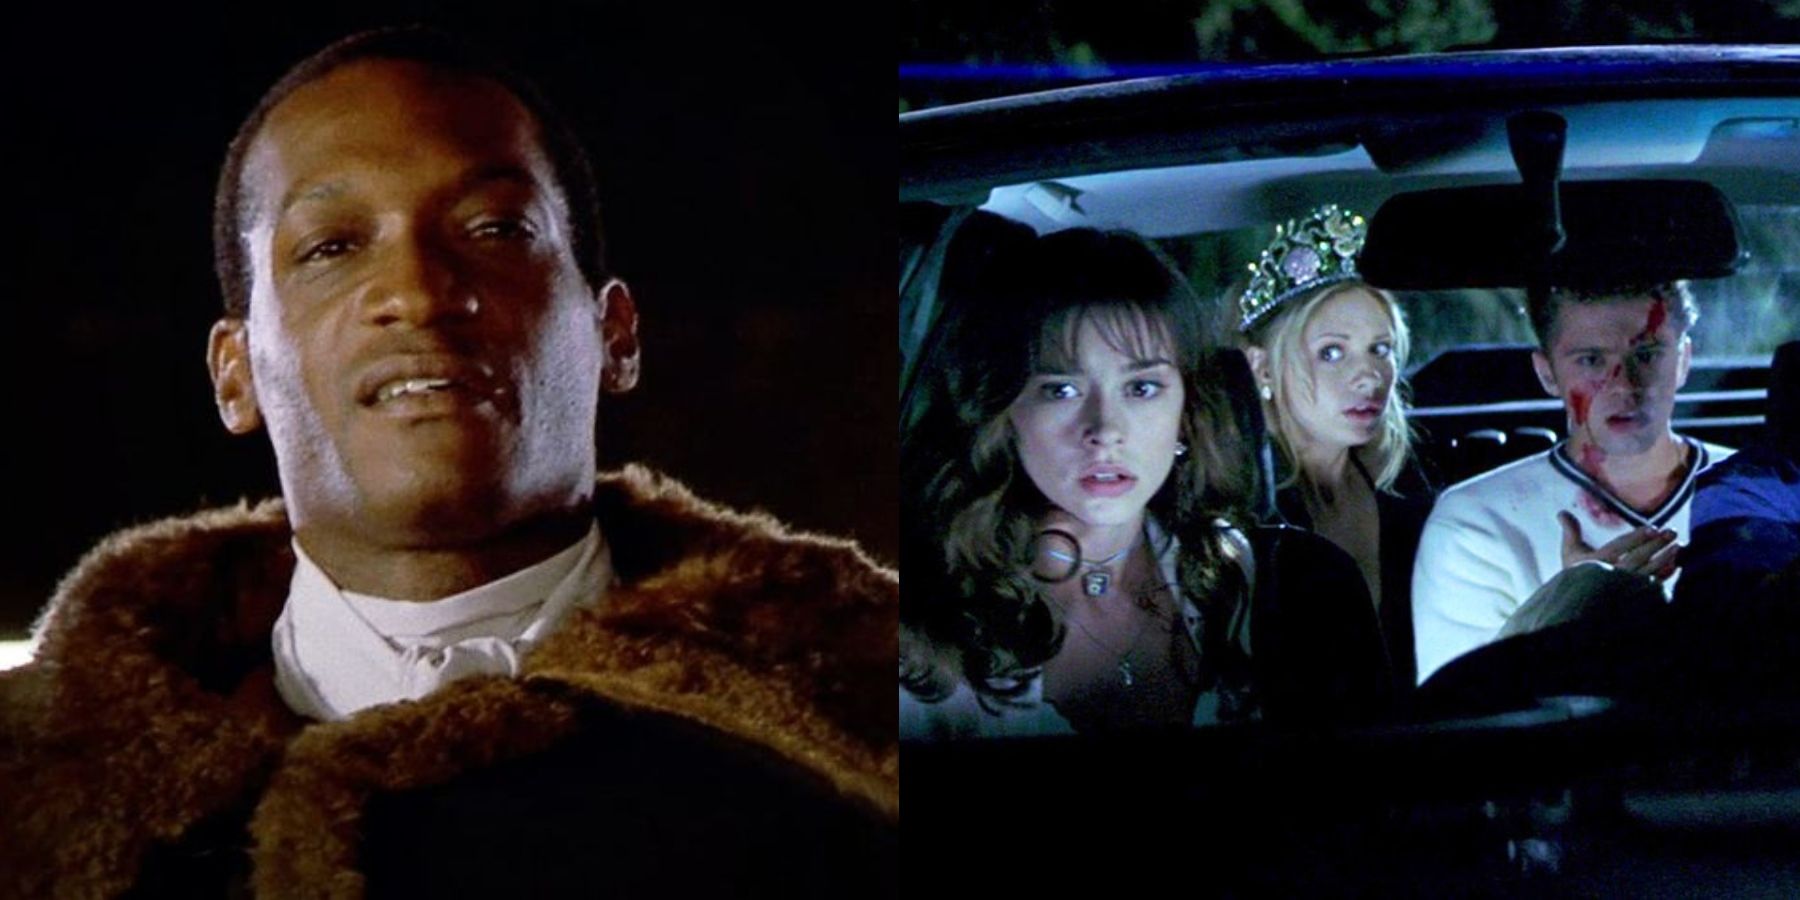 Split image of Tony Todd in Candyman and Jennifer Love Hewitt, Sarah Michelle Geller, and Ryan Phillippe in I Know What You Did Last Summer